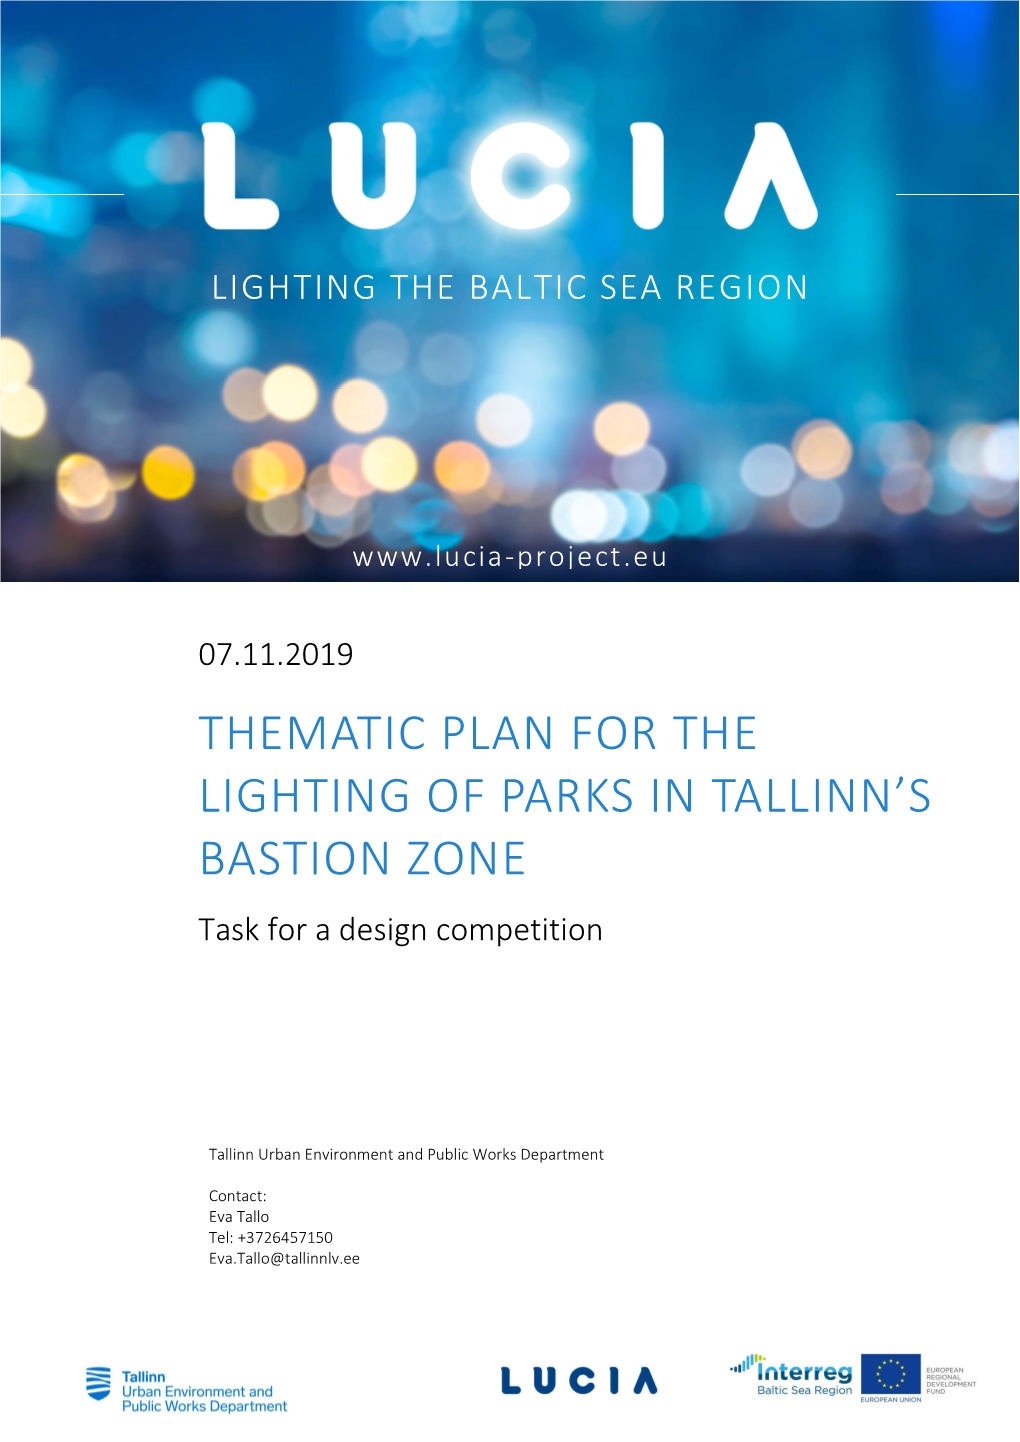 Thematic Plan for the Lighting of Parks in the Bastion Zone